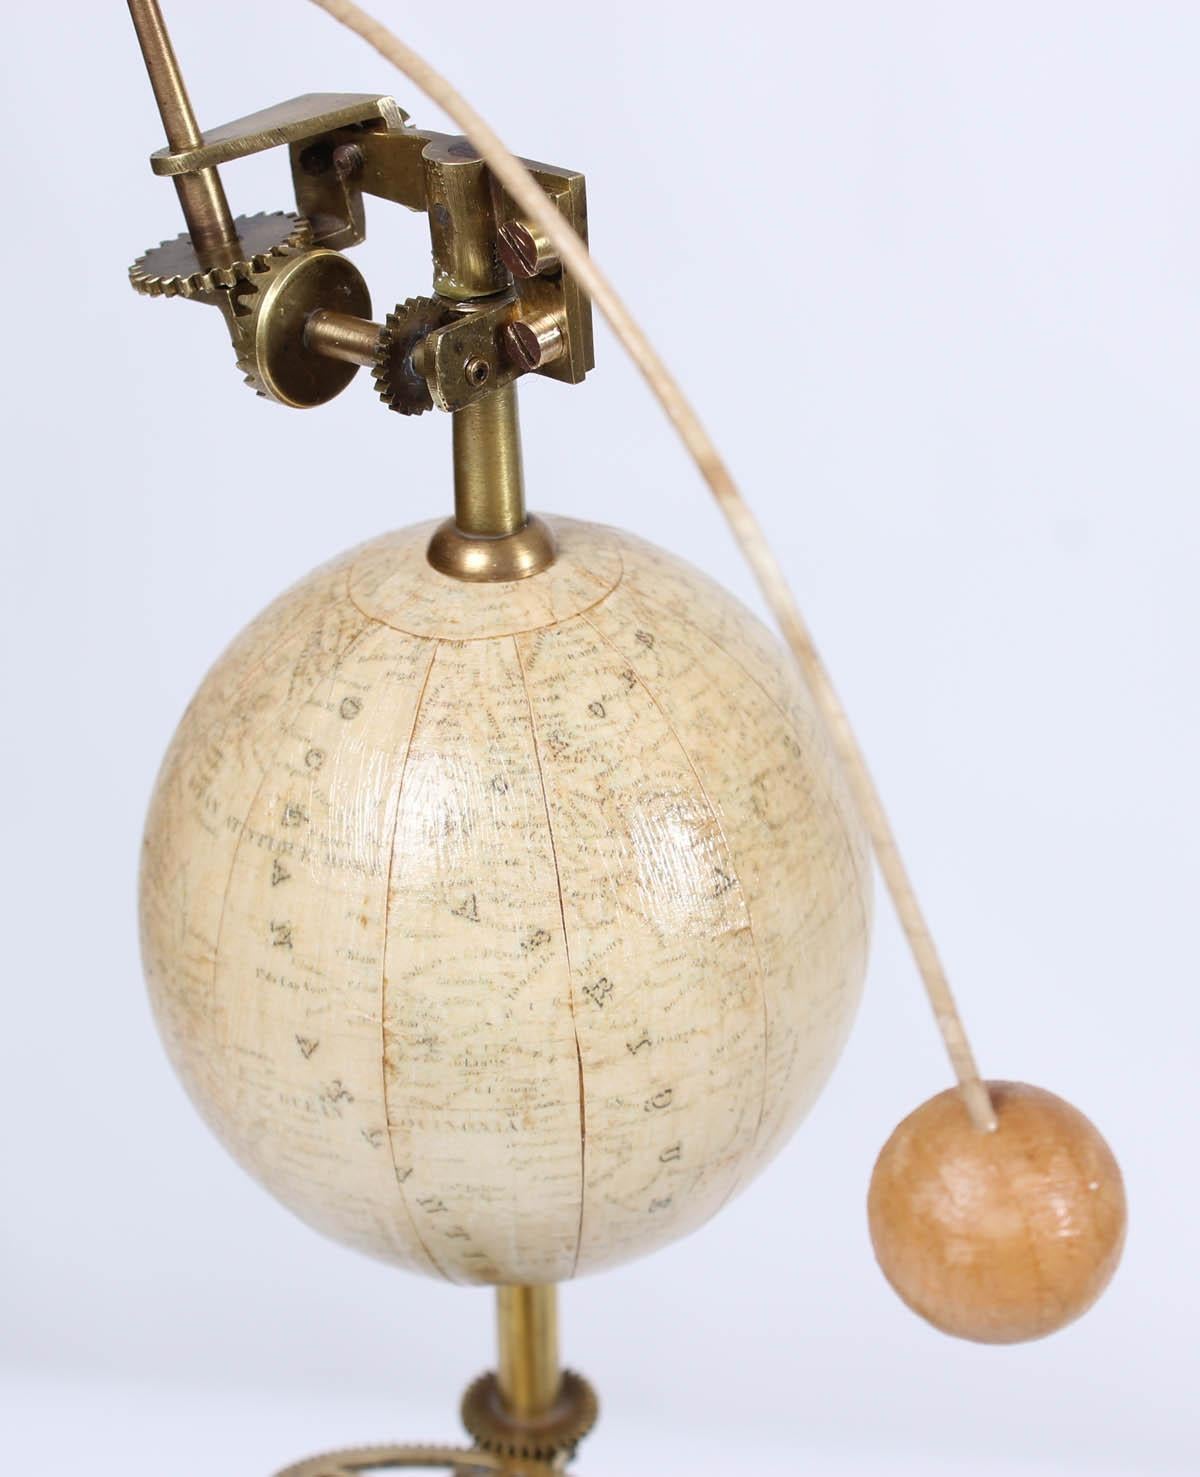 Ancient planetary model so-called Tellurium

Stockholm
metal, wood, paper
Historicism, circa 1900

Dimensions: Height ca 41 cm, length ca 60 cm

Illustrative scientific instrument with sun, earth and moon.

Description:
Above the rotation